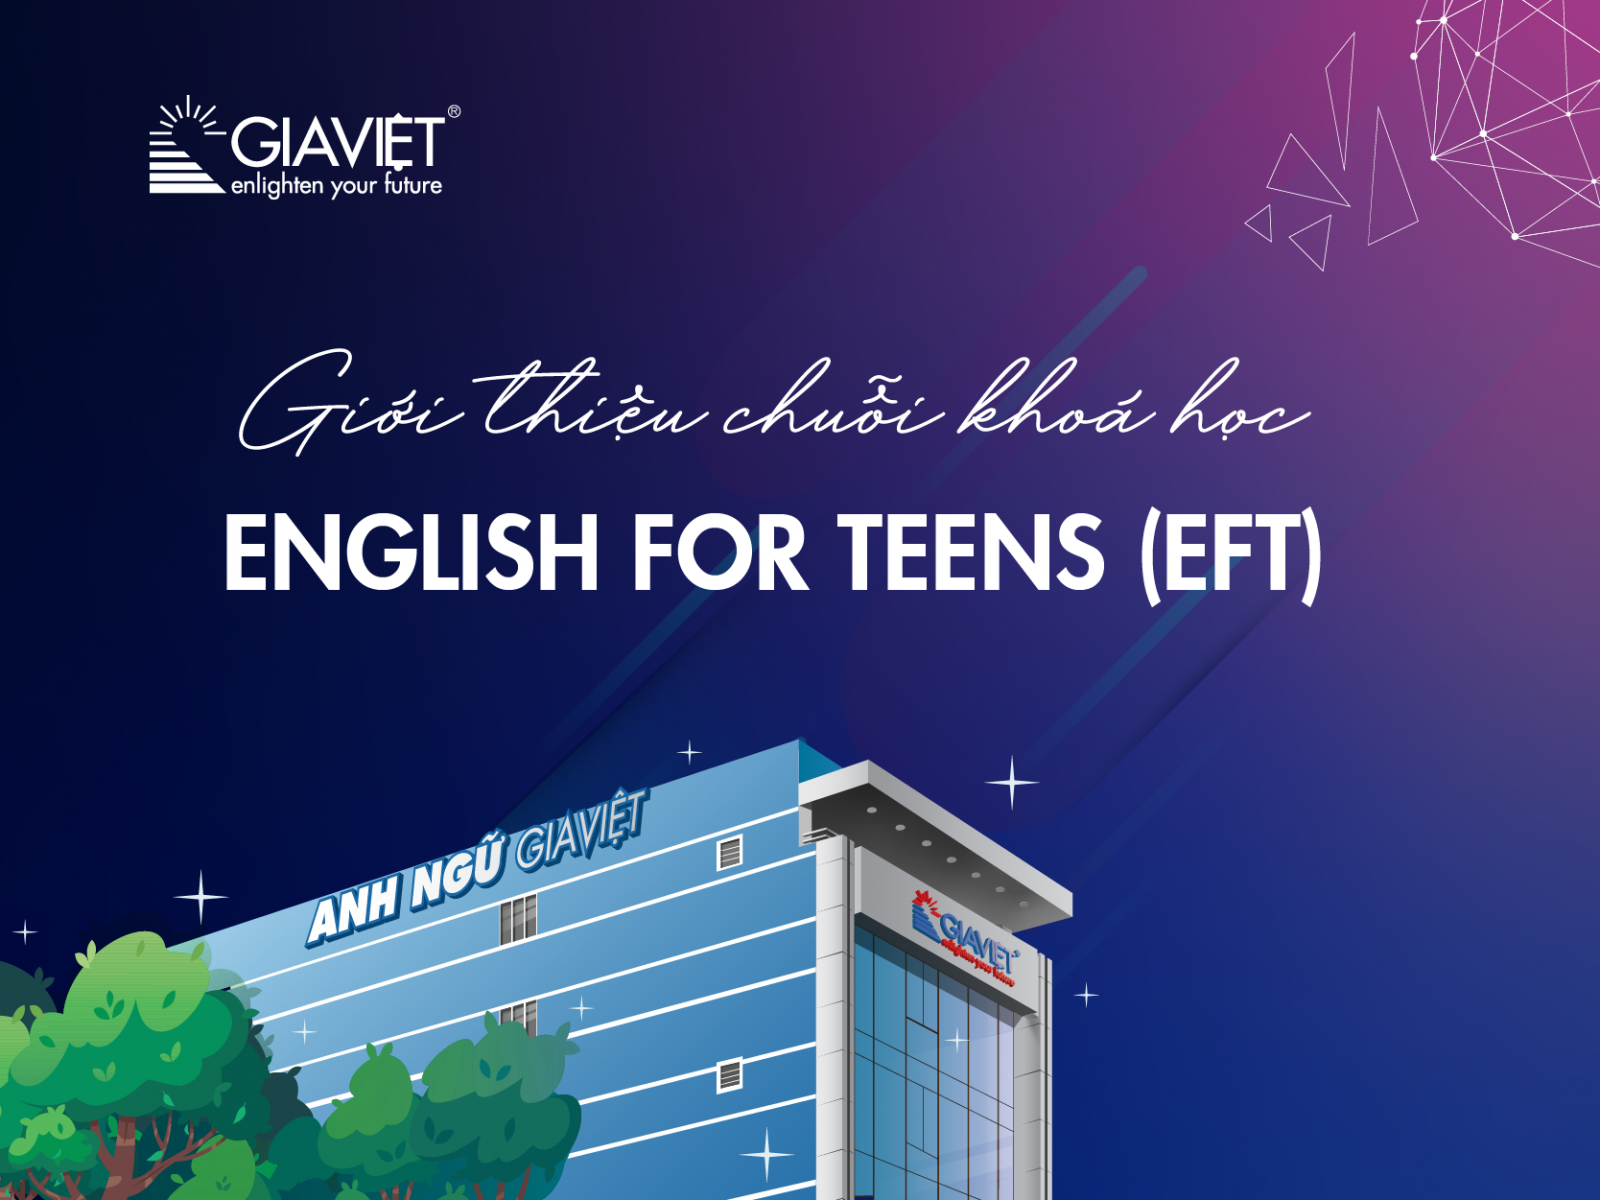 EFT - English for Teens